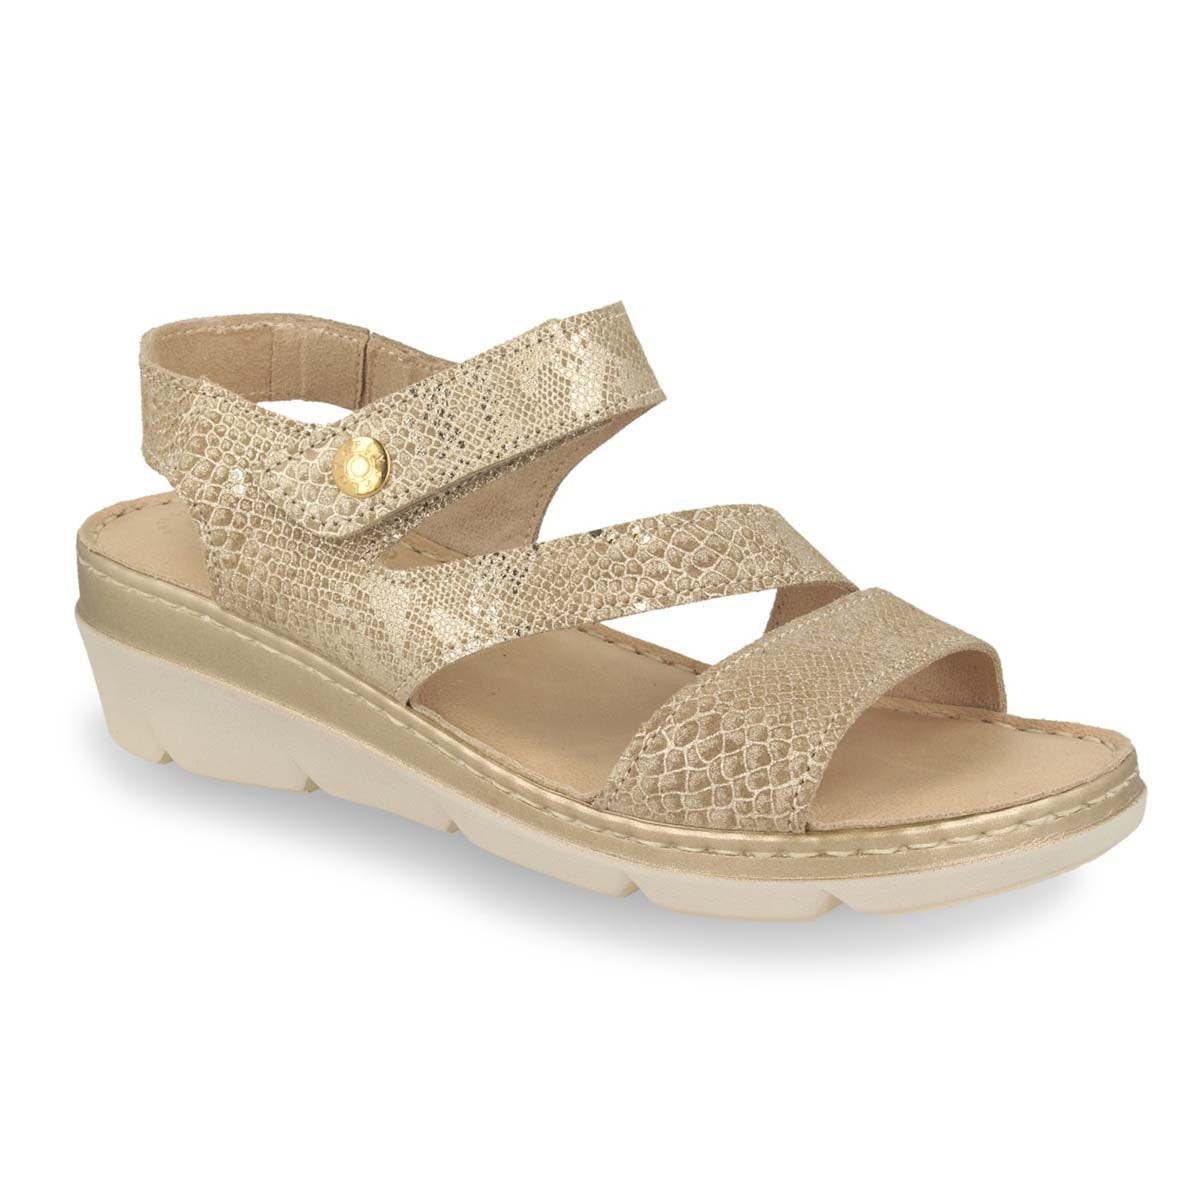 Photo of the Leather Woman Sandal Beige (71f22mg)